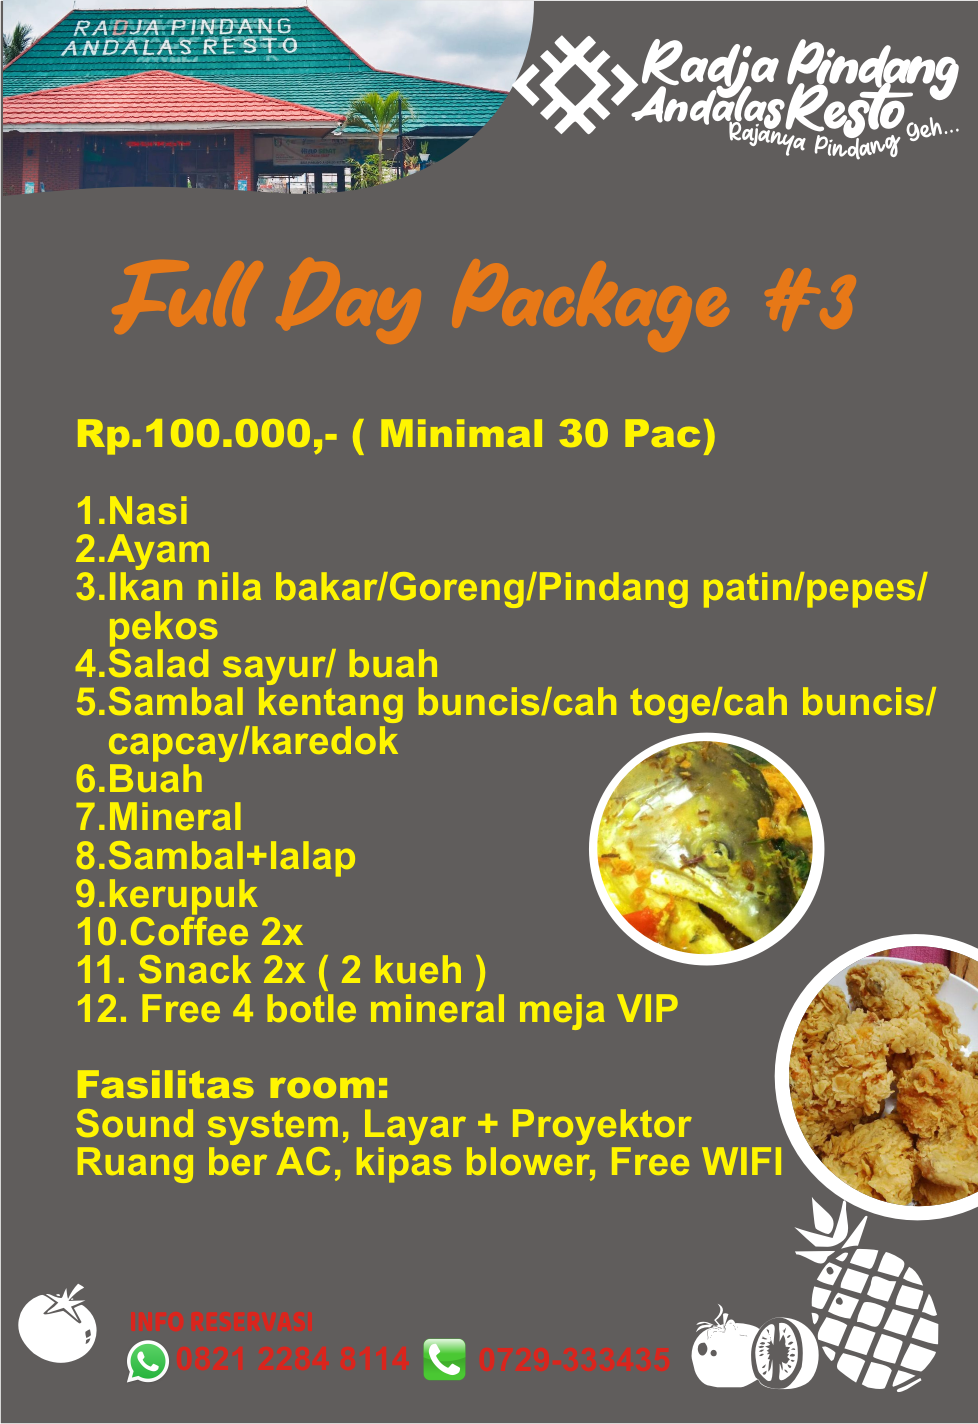 FULL DAY PACKAGE #3